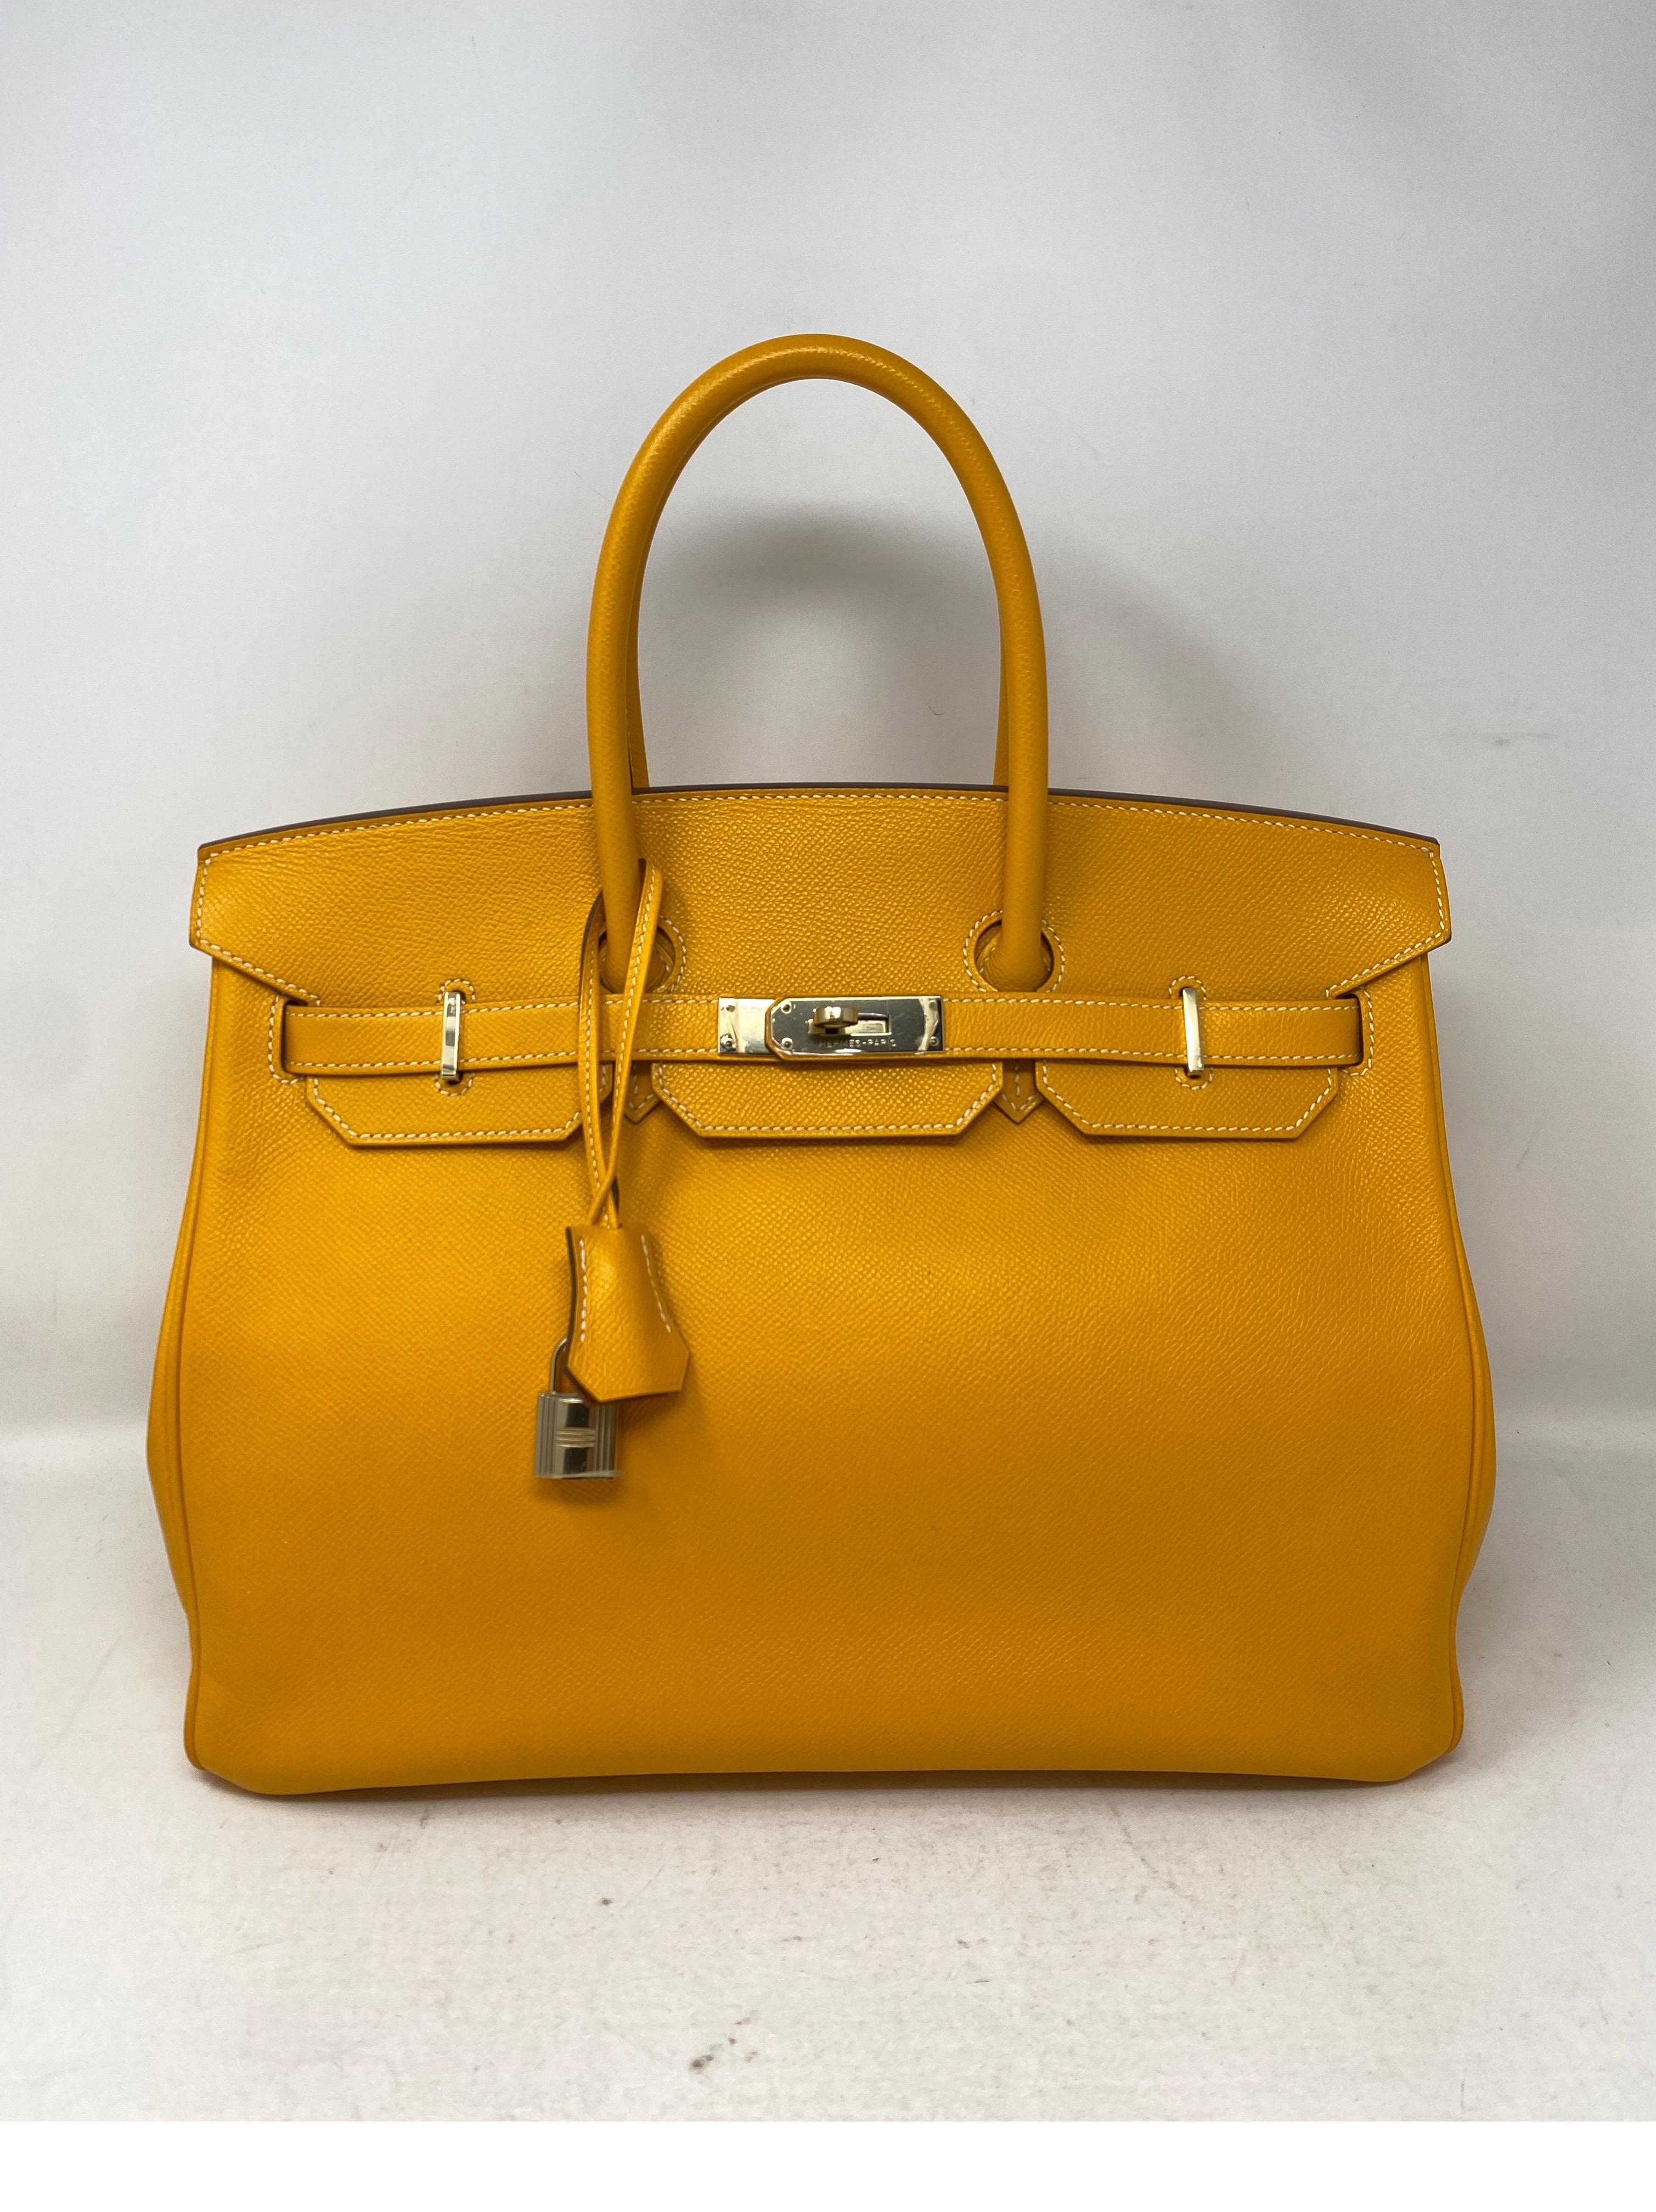 Hermes Jaune Birkin 35 Bag. Candy Birkin Bag. Interior is Potiron Orange leather and exterior of bag is Jaune yellow color. Rare collector's piece. Gold hardware. Epsom leather. Vibrant yellow color that adds pop to any wardrobe. Another great